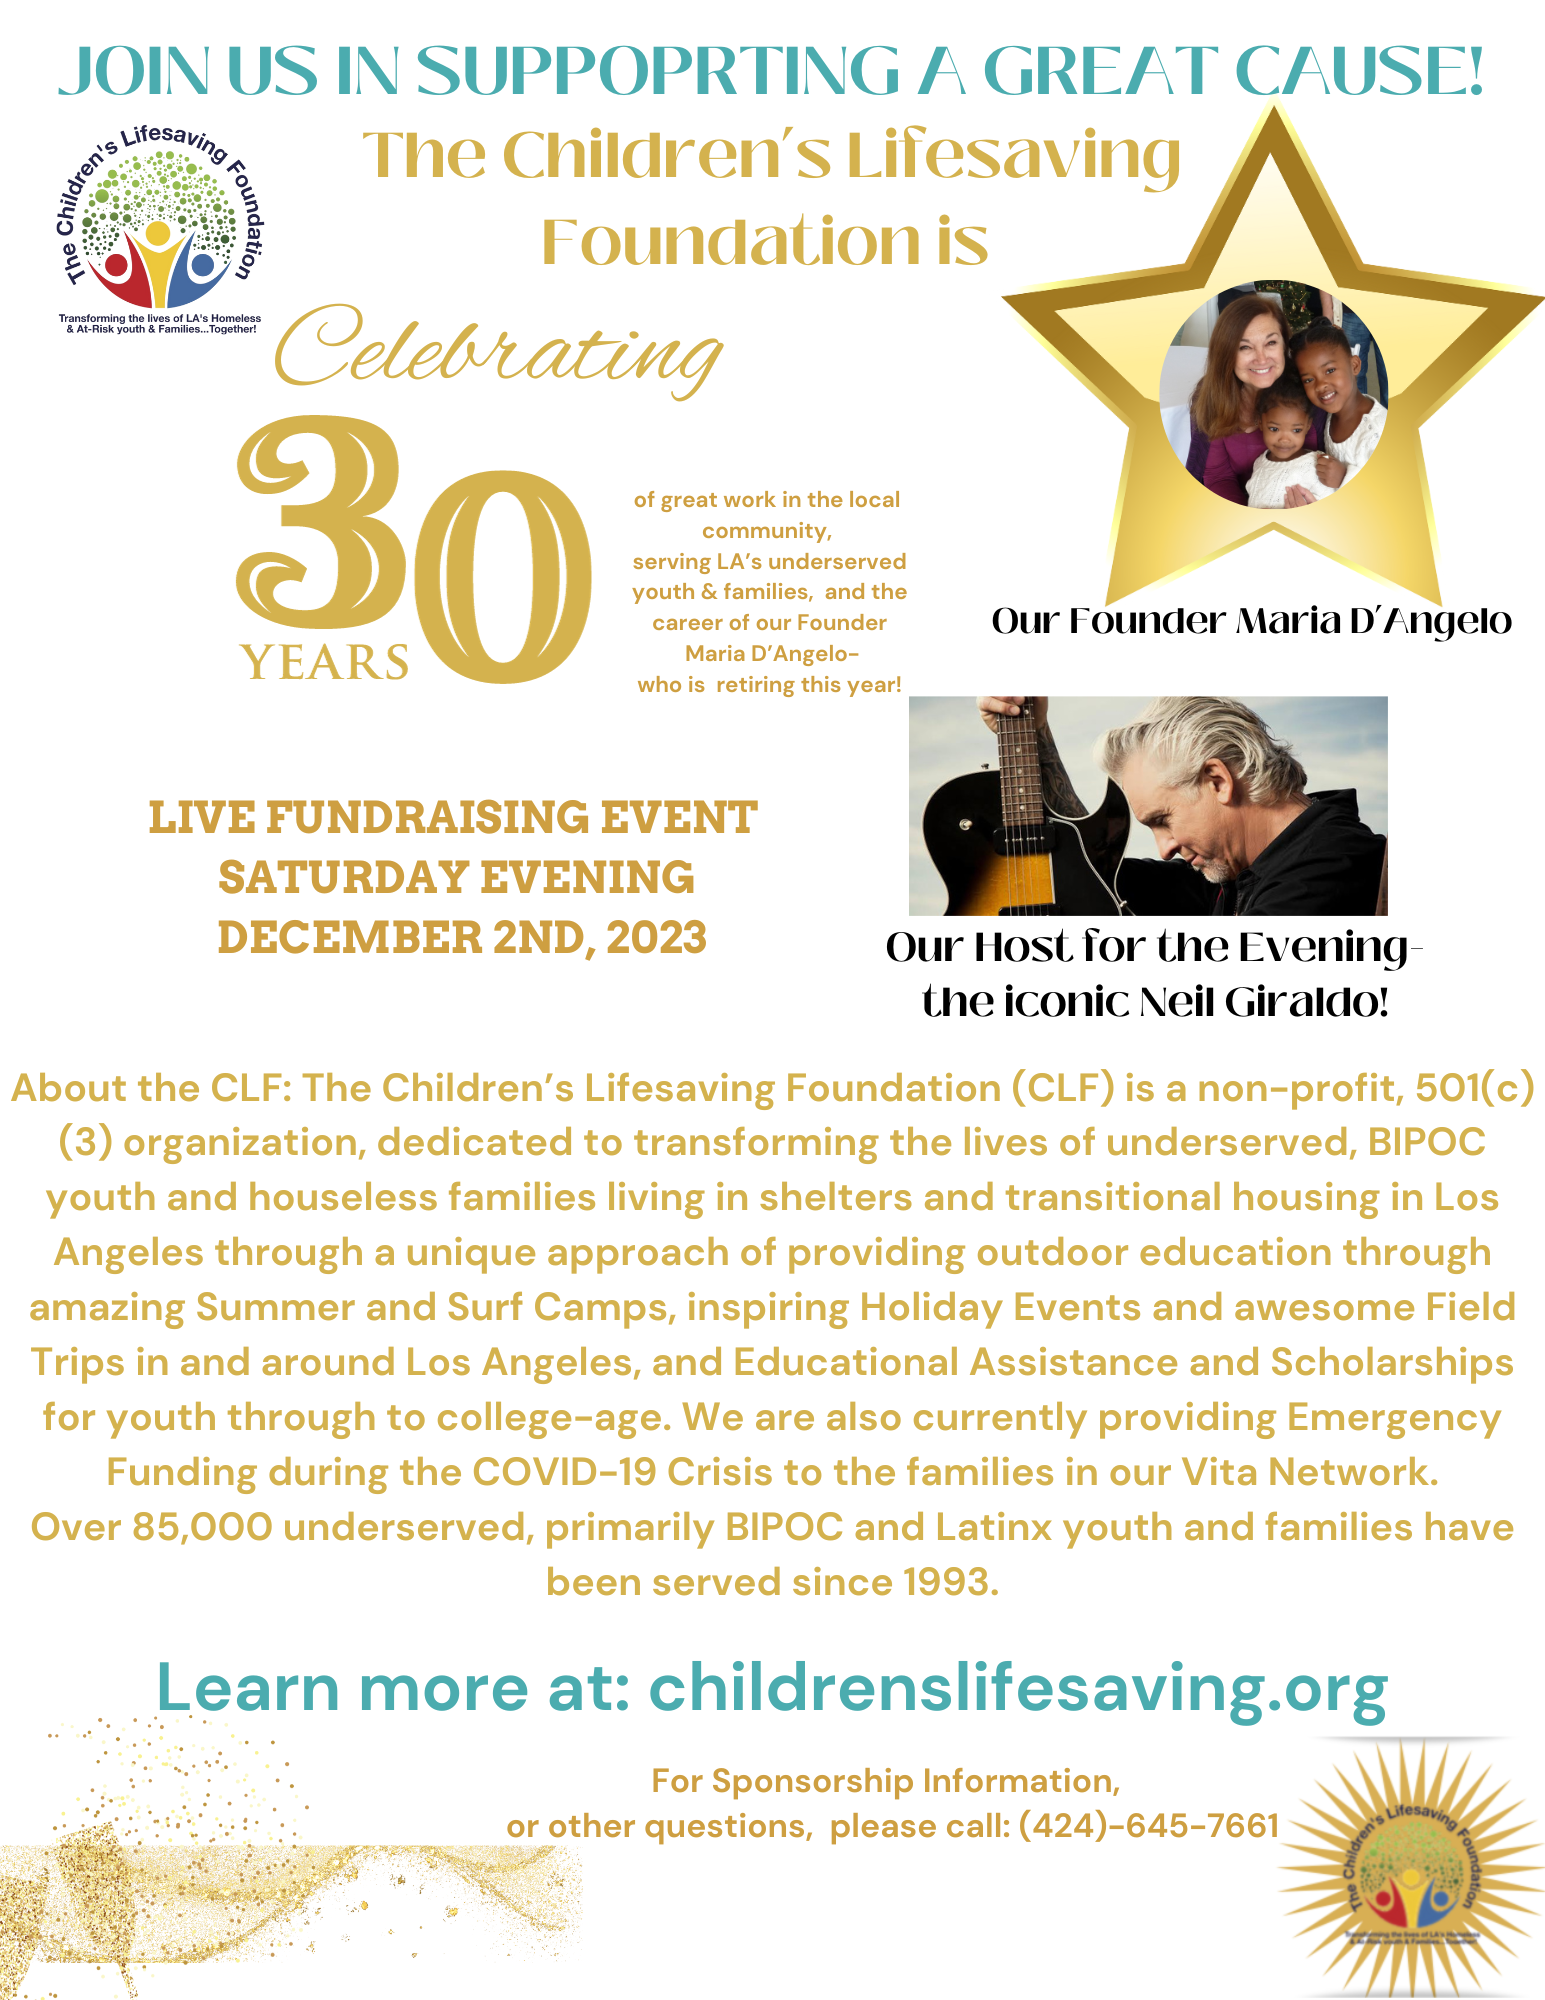 CLF Fundraising event hosted by Spyder on Dec 2nd!